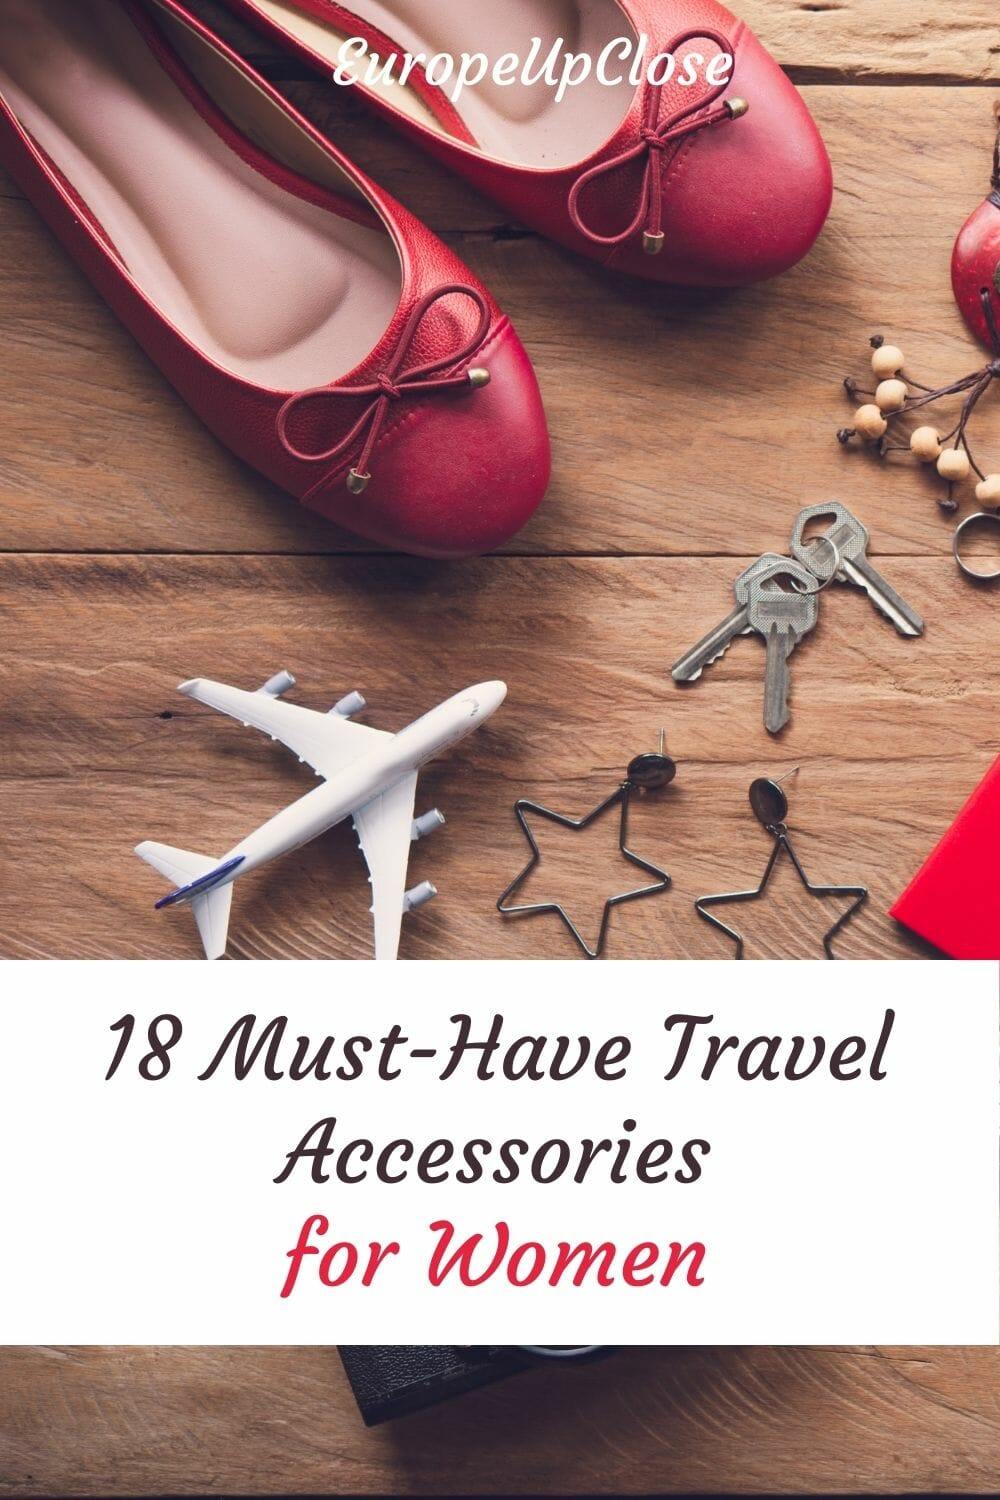 18 Must-Have Travel Accessories for Women - Europe Up Close